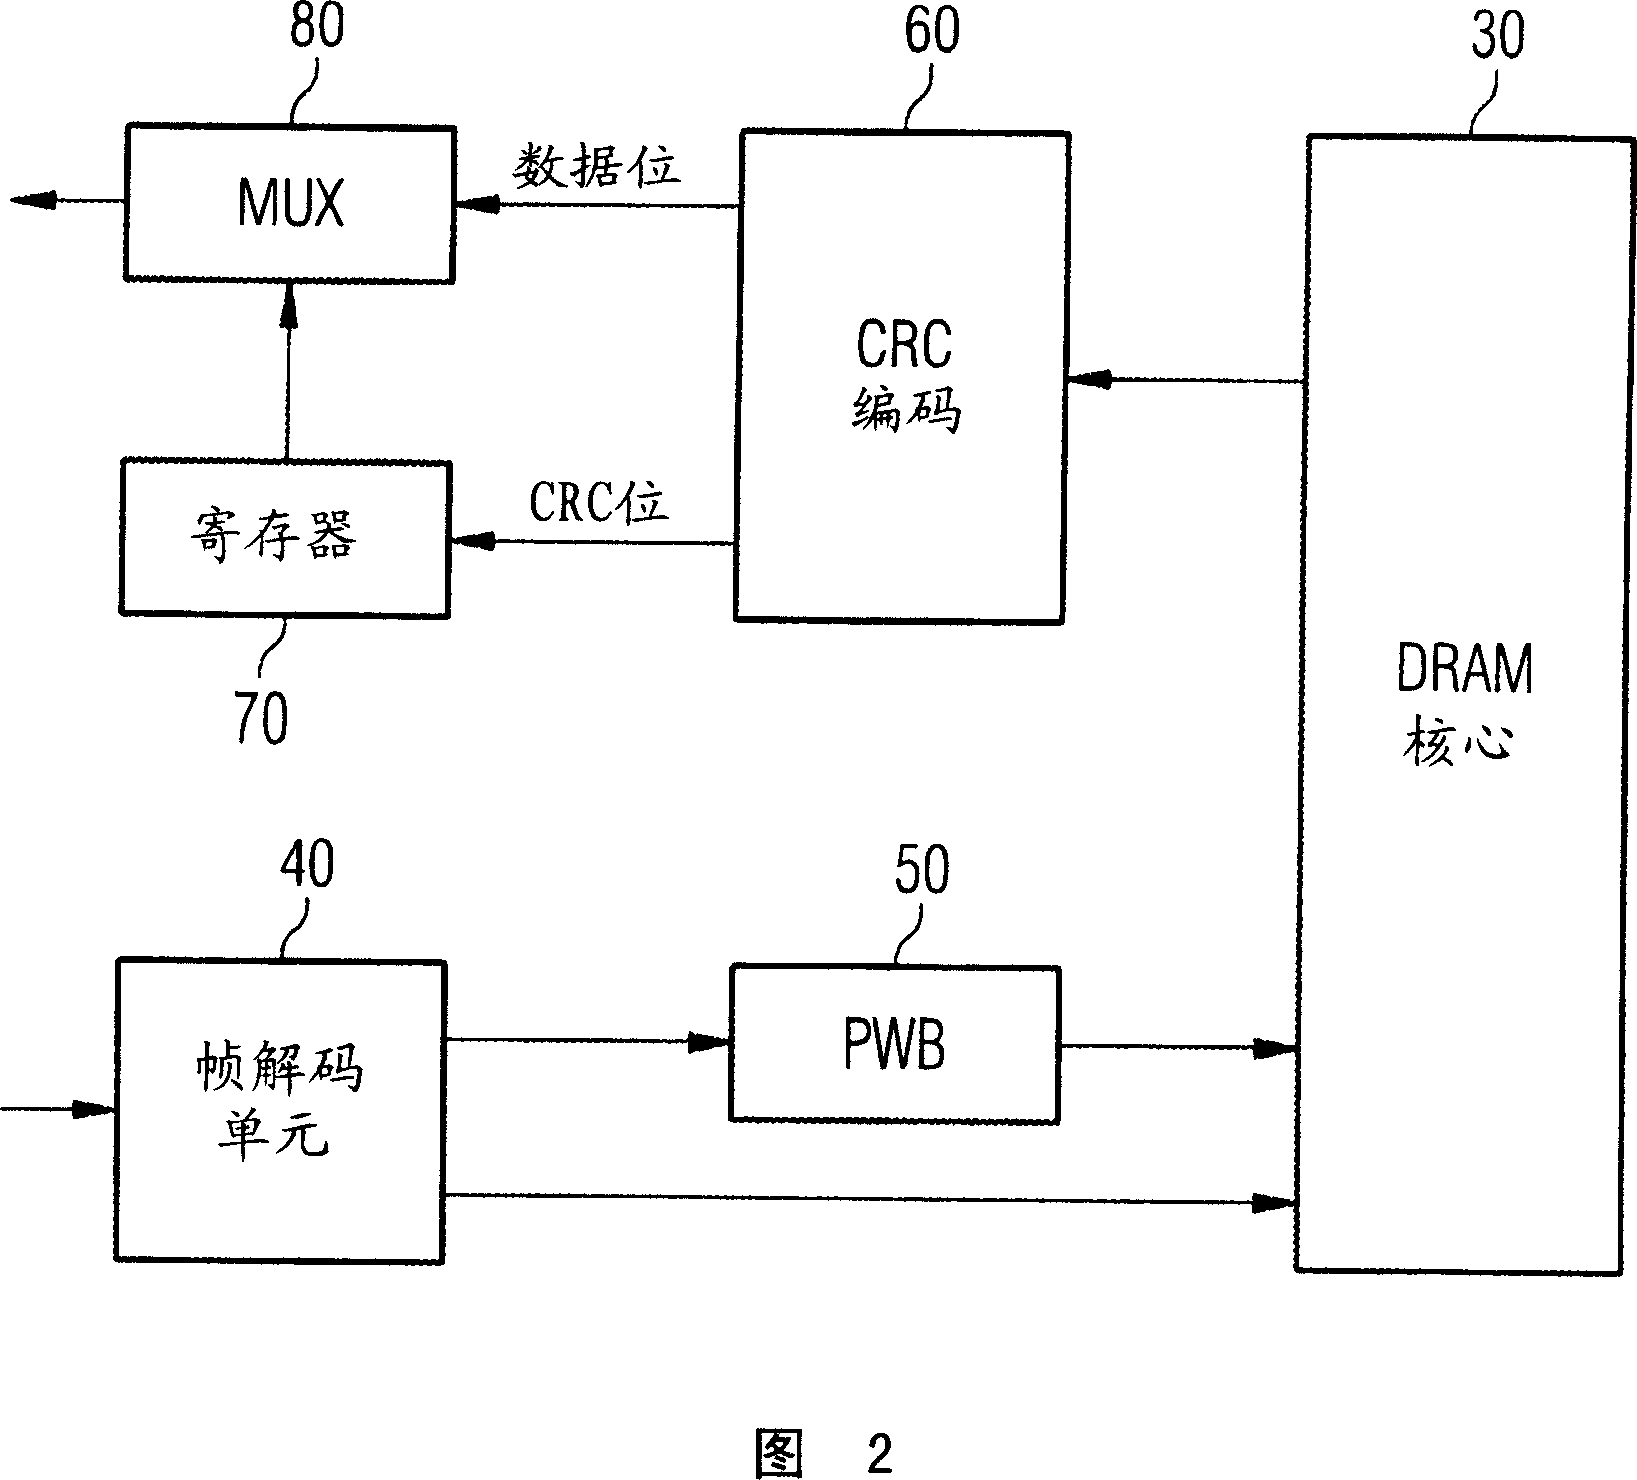 Data memory system and method for transferring data into a data memory